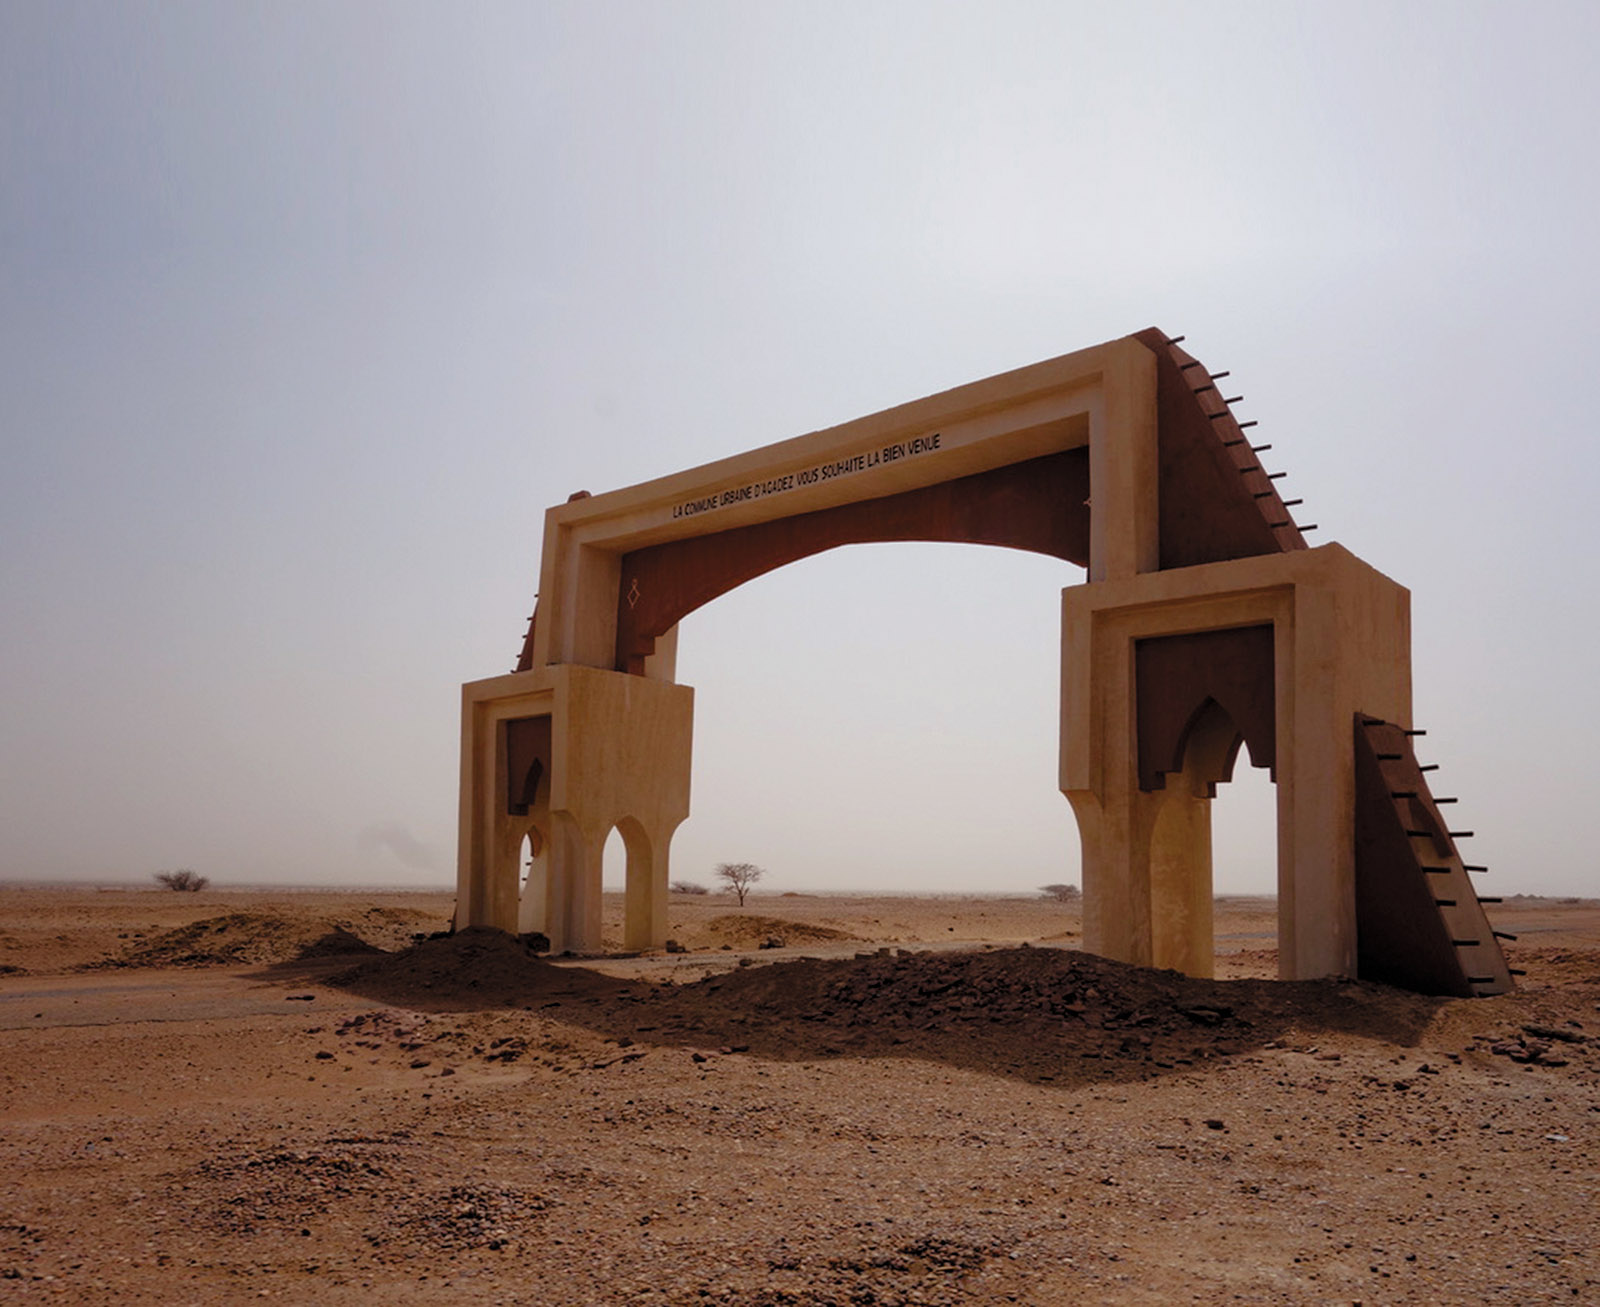 Agadez, Niger, 2018; the French inscription on the gate reads, ‘The city of Agadez welcomes you’